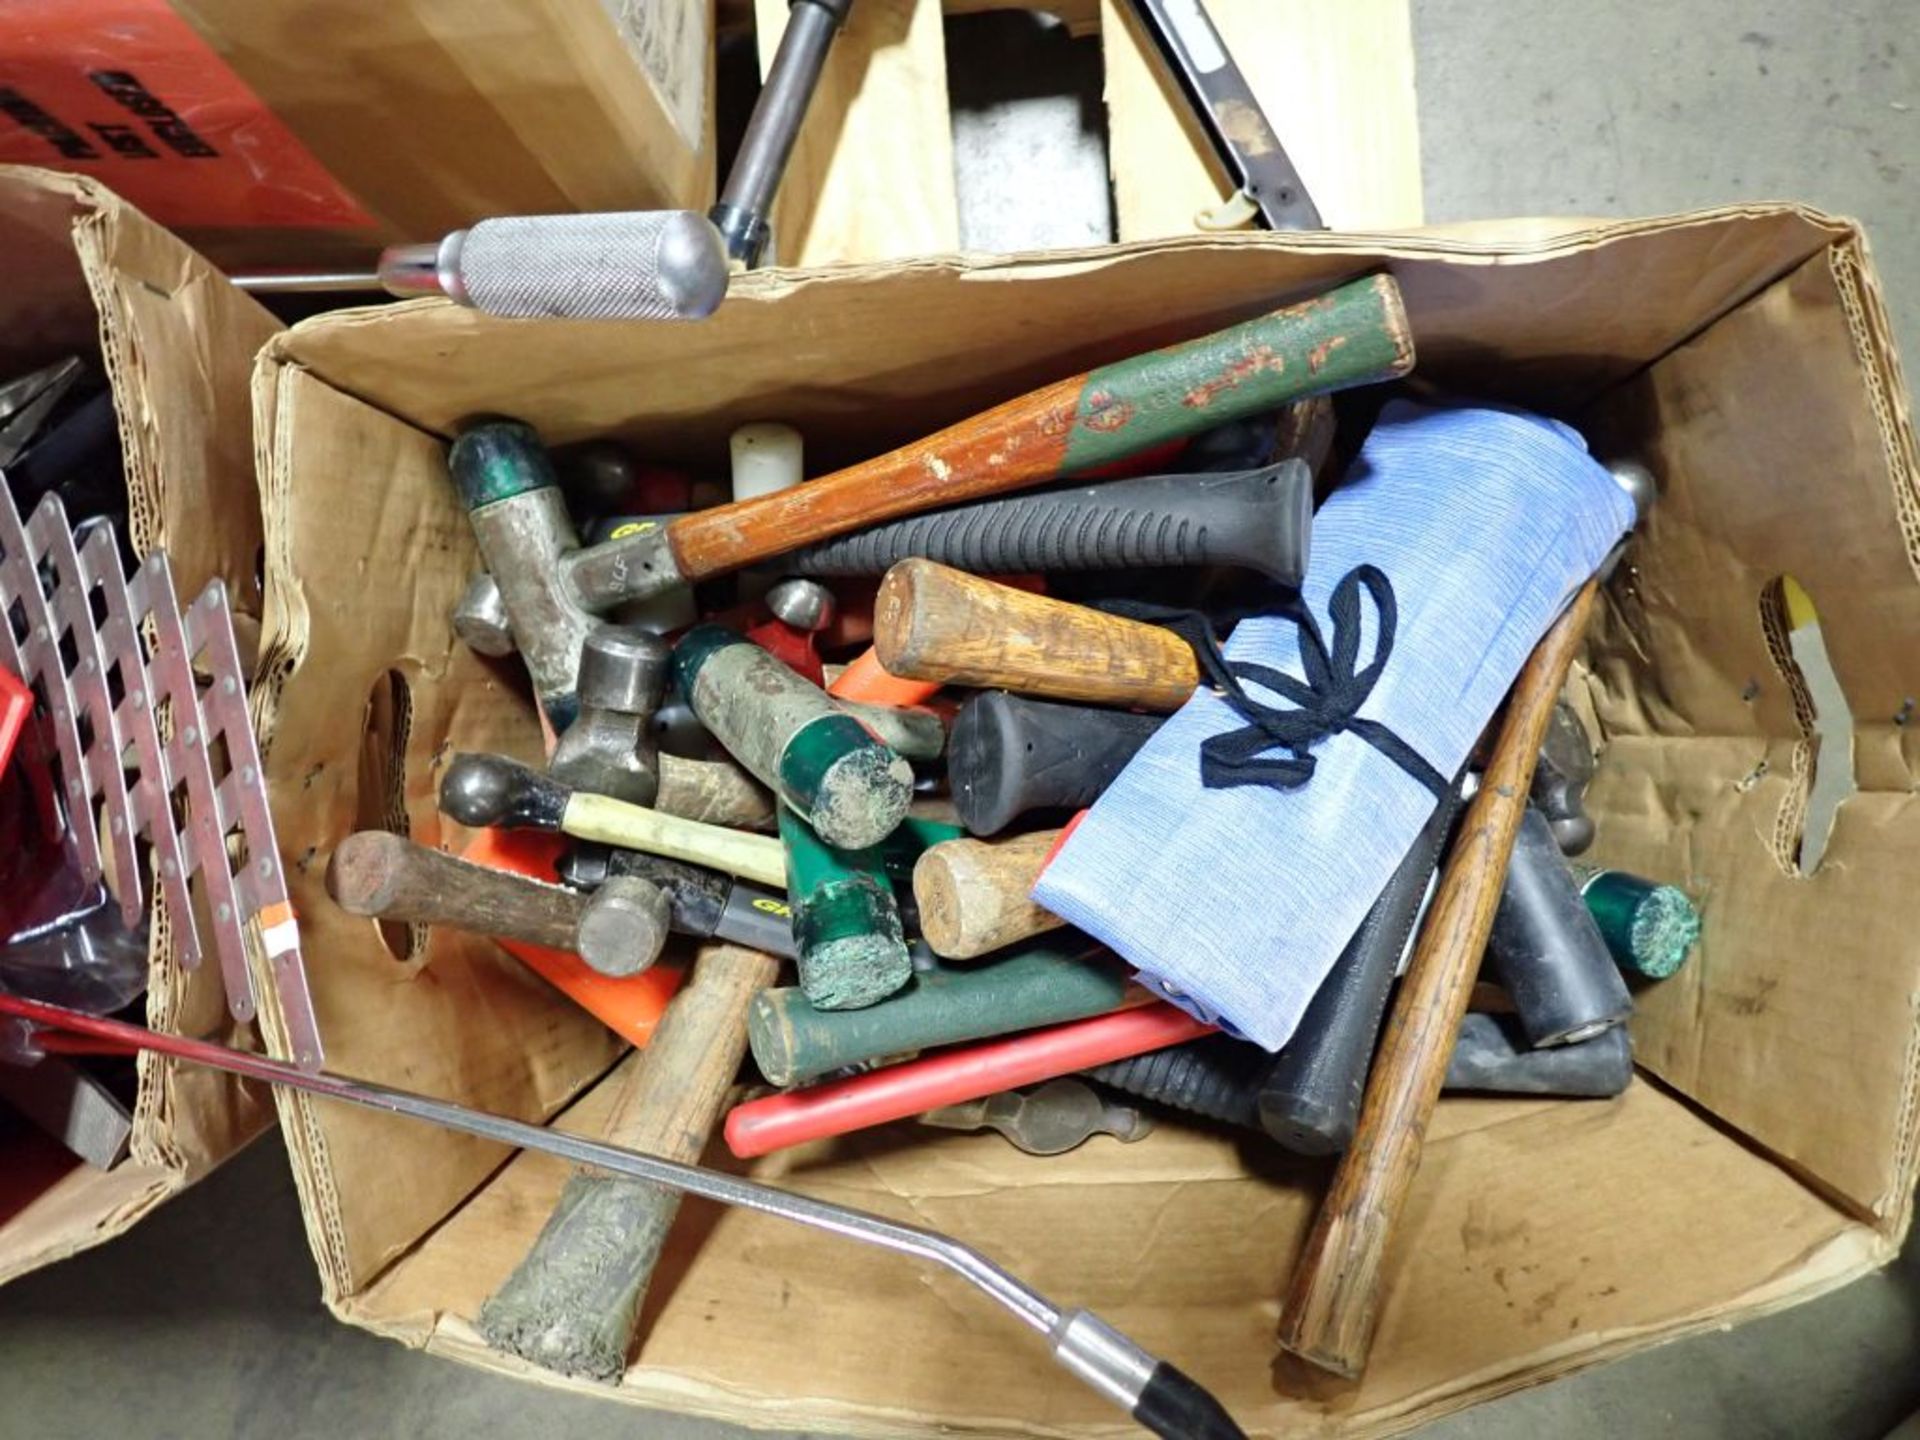 Lot of Assorted Tools | Tag: 241476 | Limited Forklift Assistance Available - $10.00 Lot Loading - Image 2 of 8